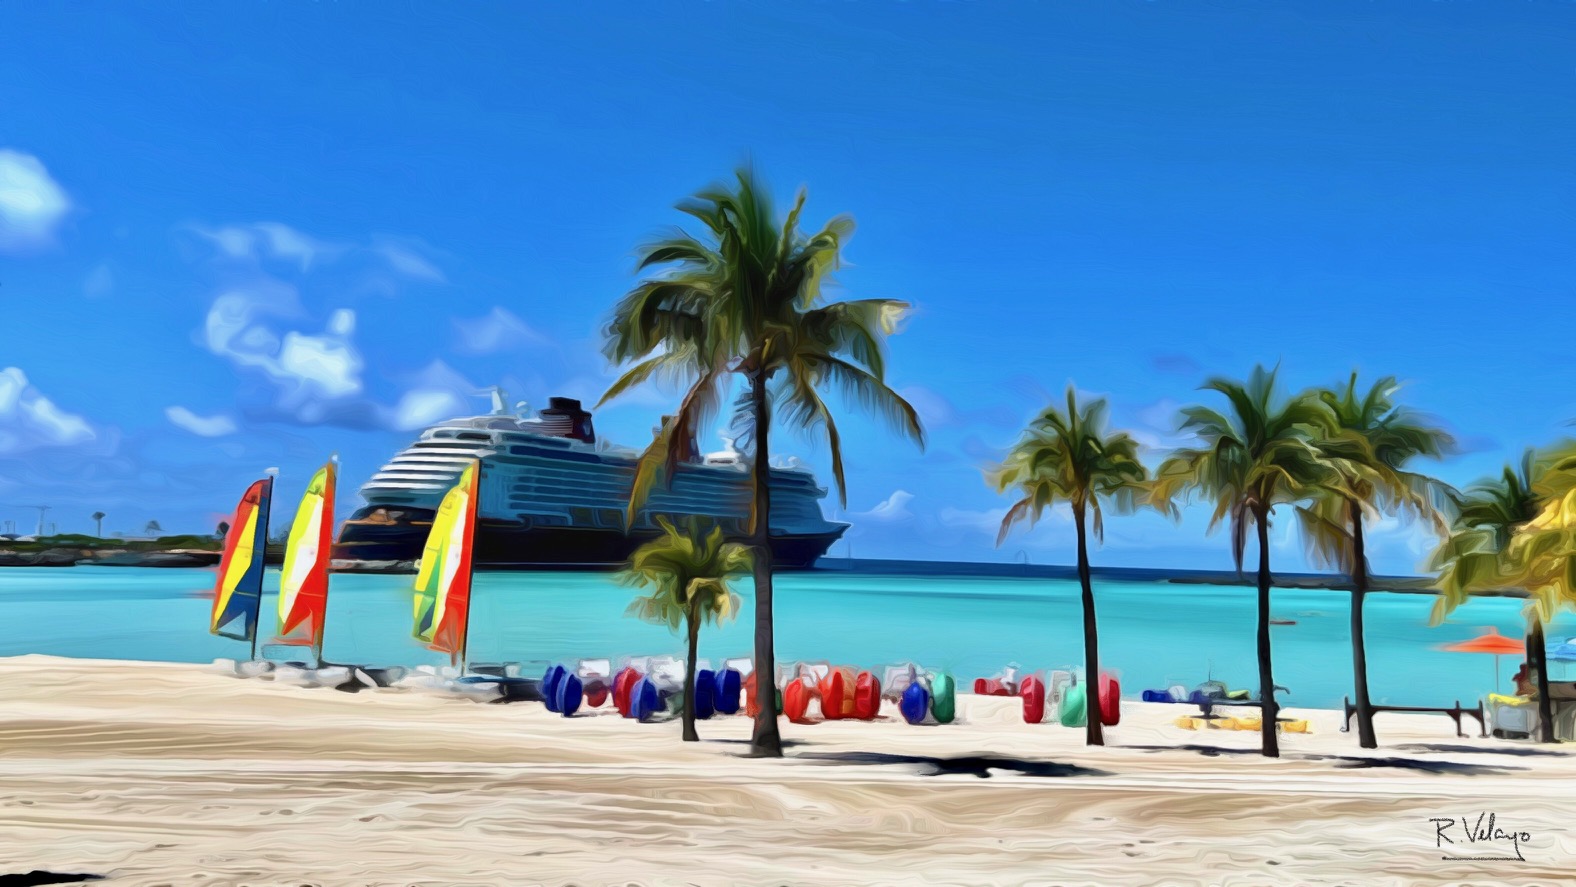 "VIEW OF THE DISNEY DREAM FROM CASTAWAY CAY BEACH" [Created: 7/23/2022]